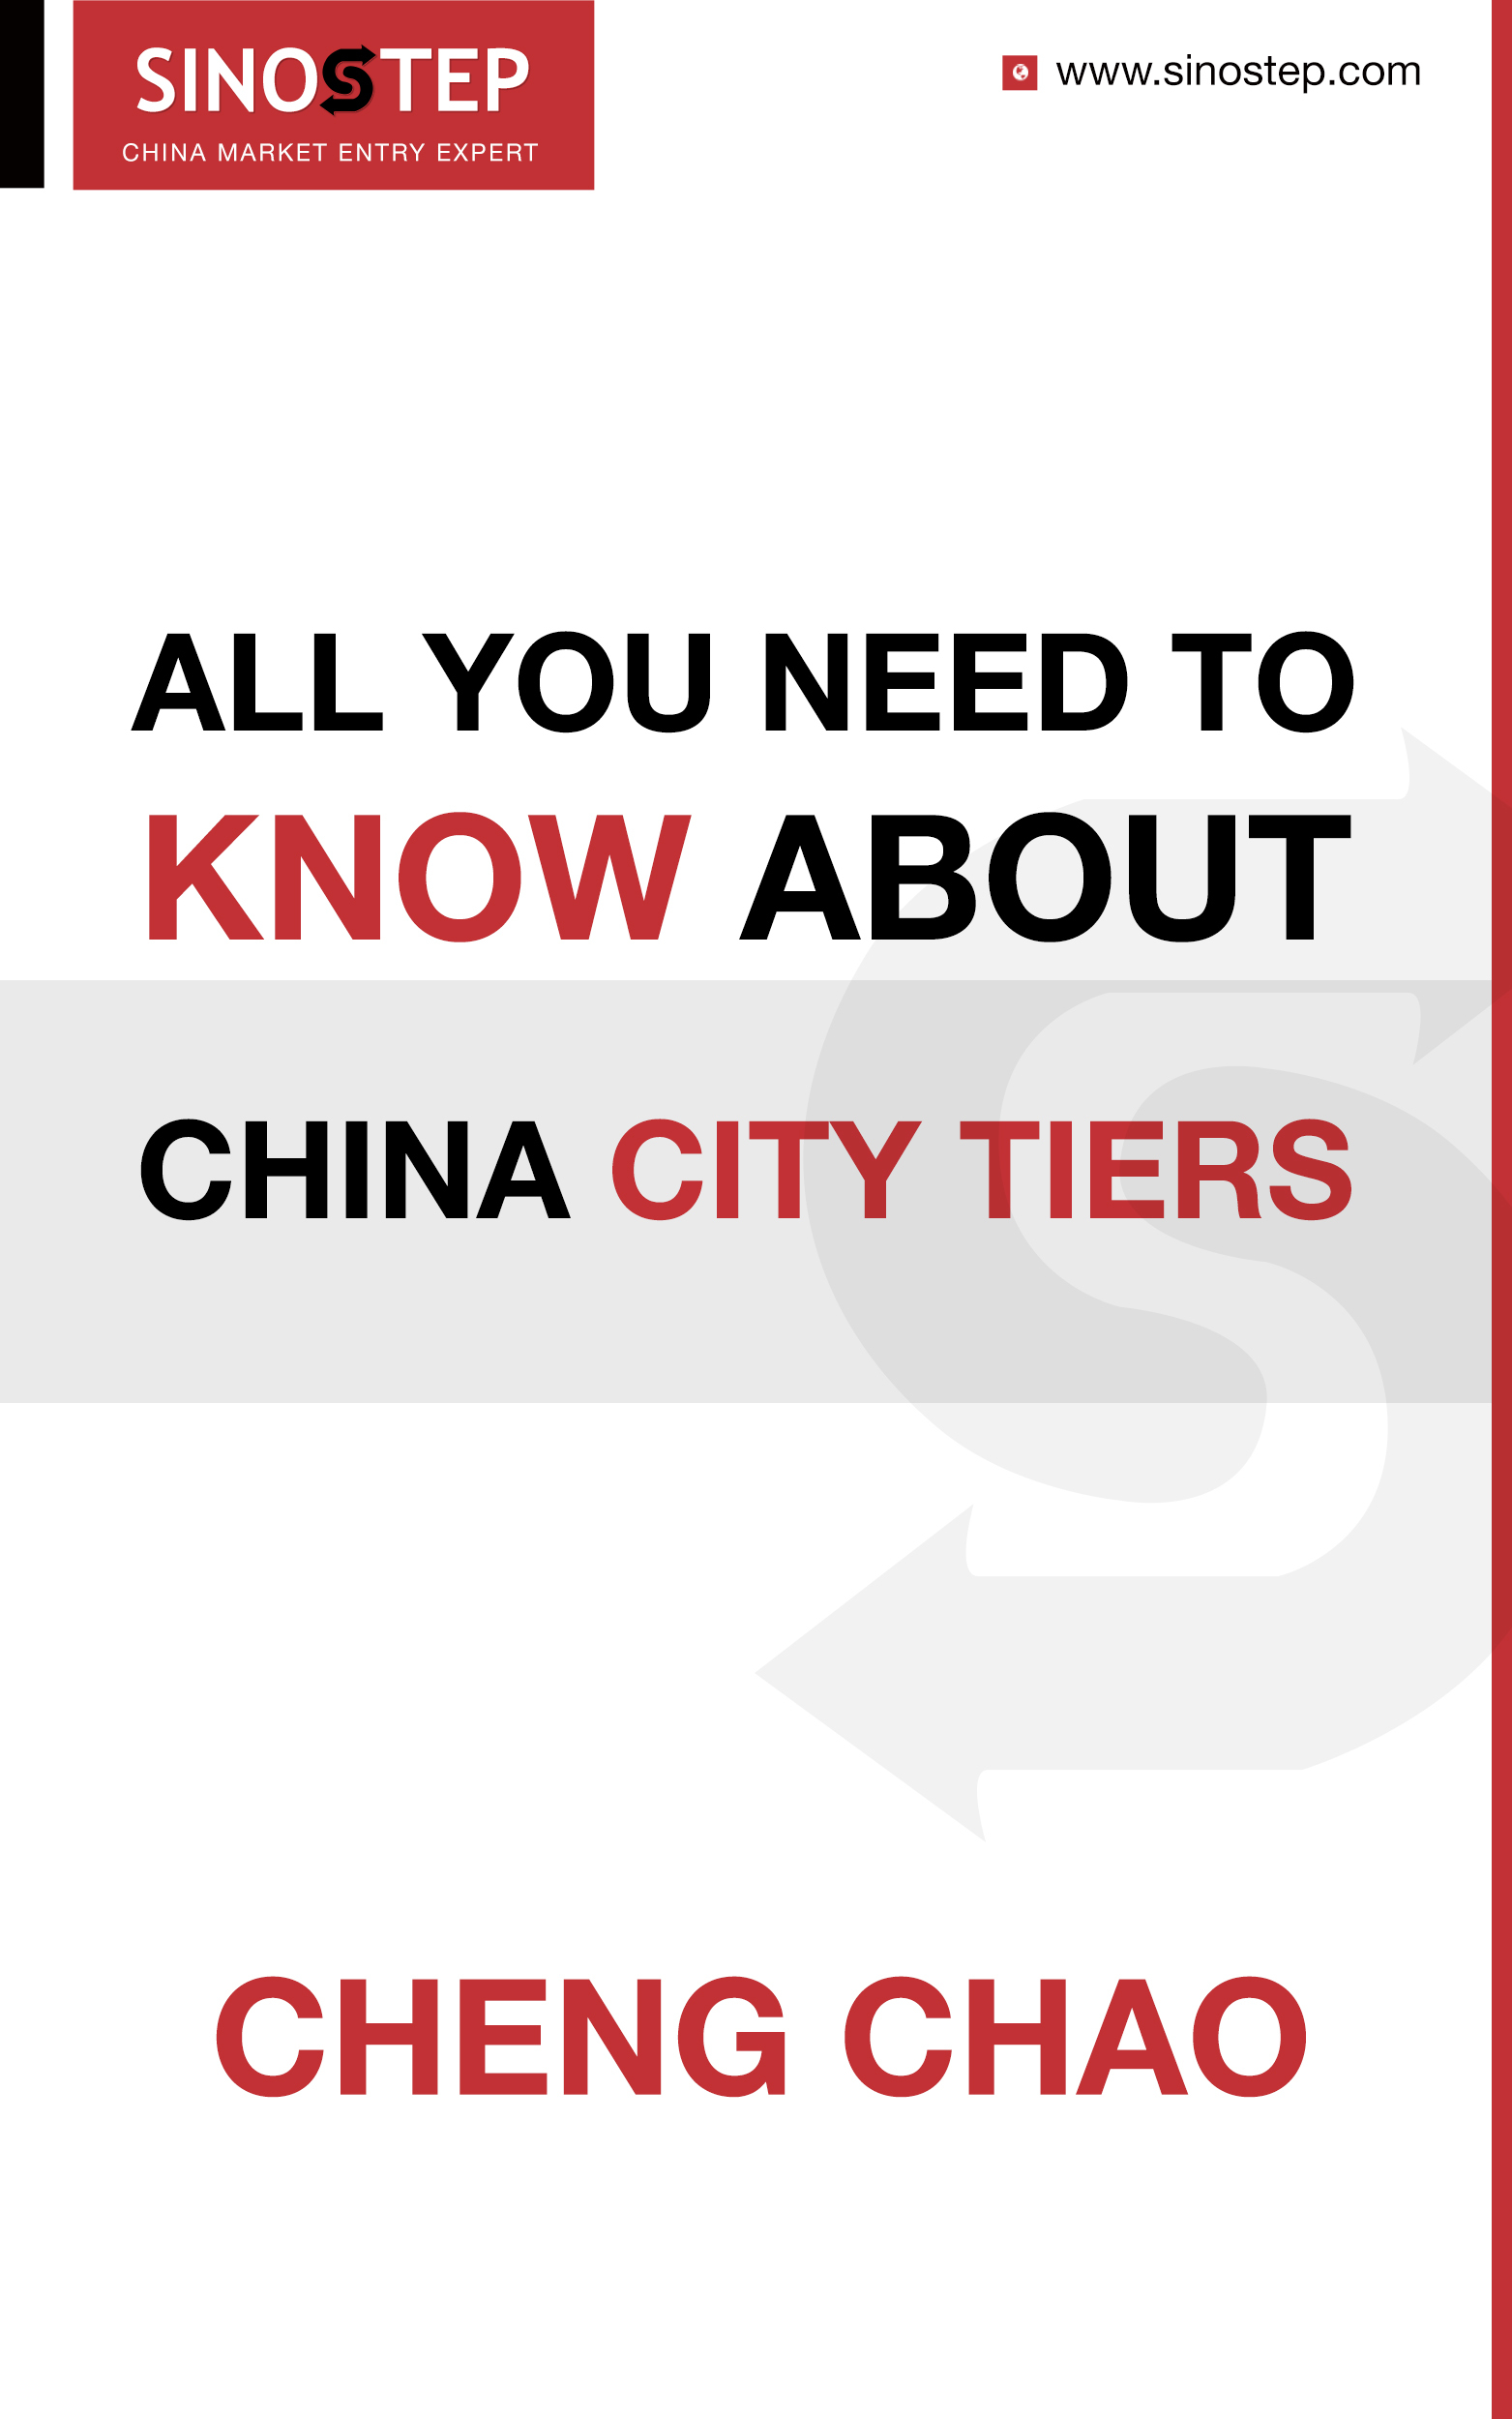 All You Need to Know about China City Tiers